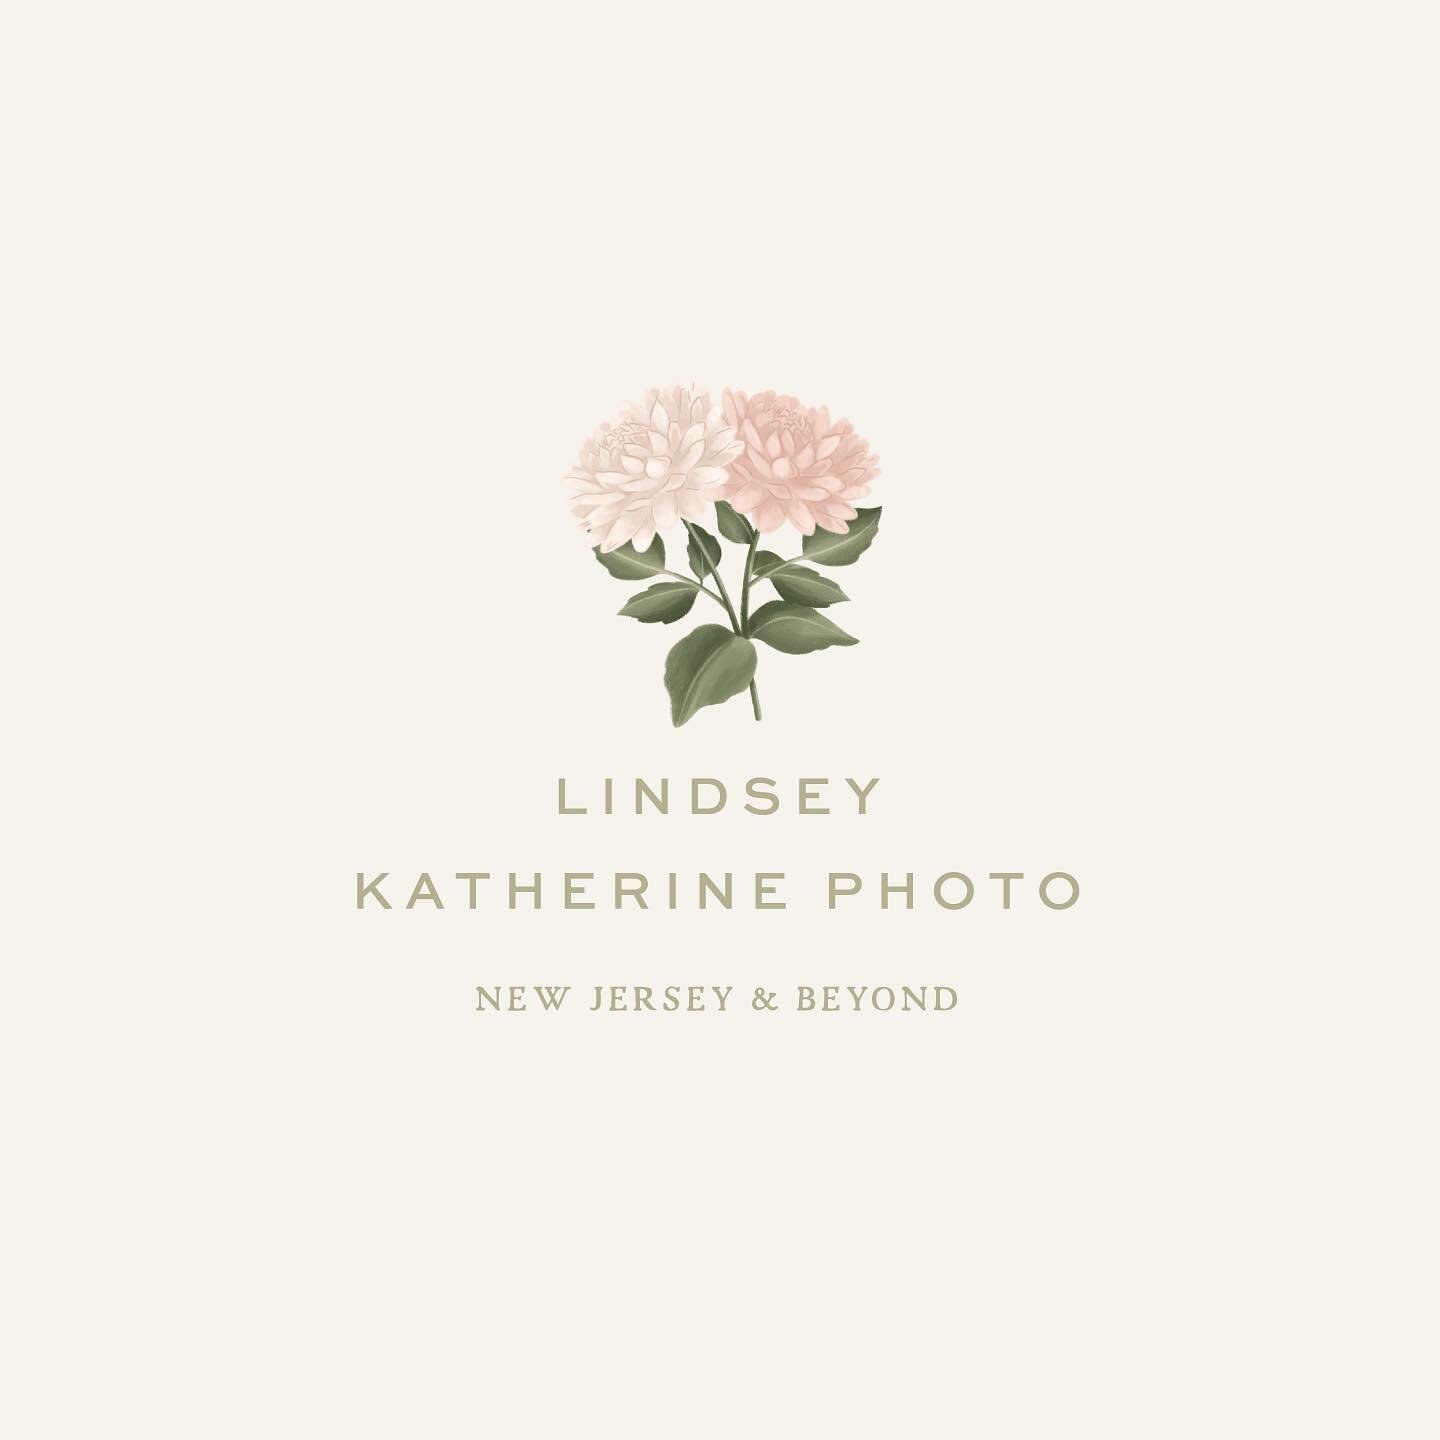 Hi! I know there has been some radio silence from me on this little app, but behind it I&rsquo;ve been quite busy! I decided it was time for an overhaul on my branding and website. It&rsquo;s been something I&rsquo;ve wanted to do for a while but too